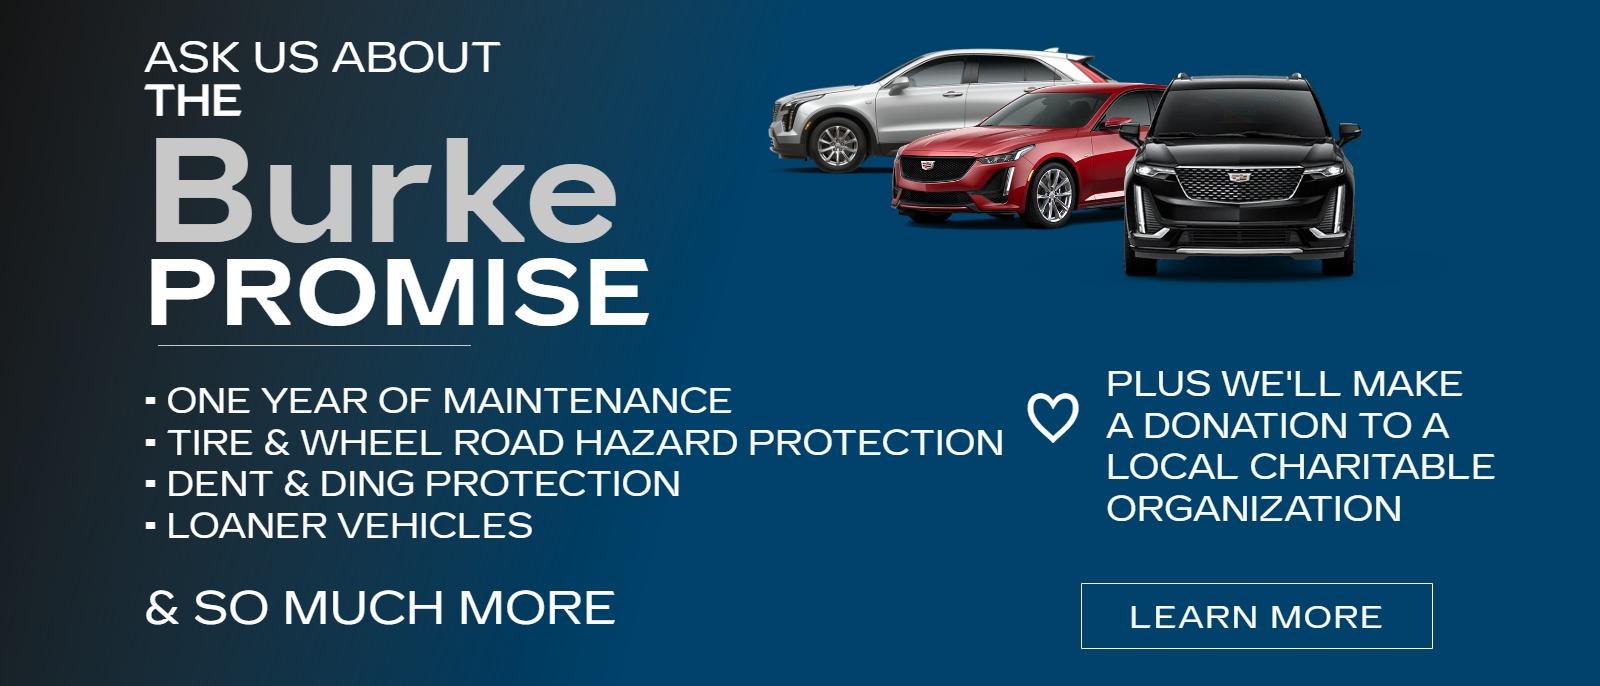 Burke Cadillac is Home of the Burke Promise